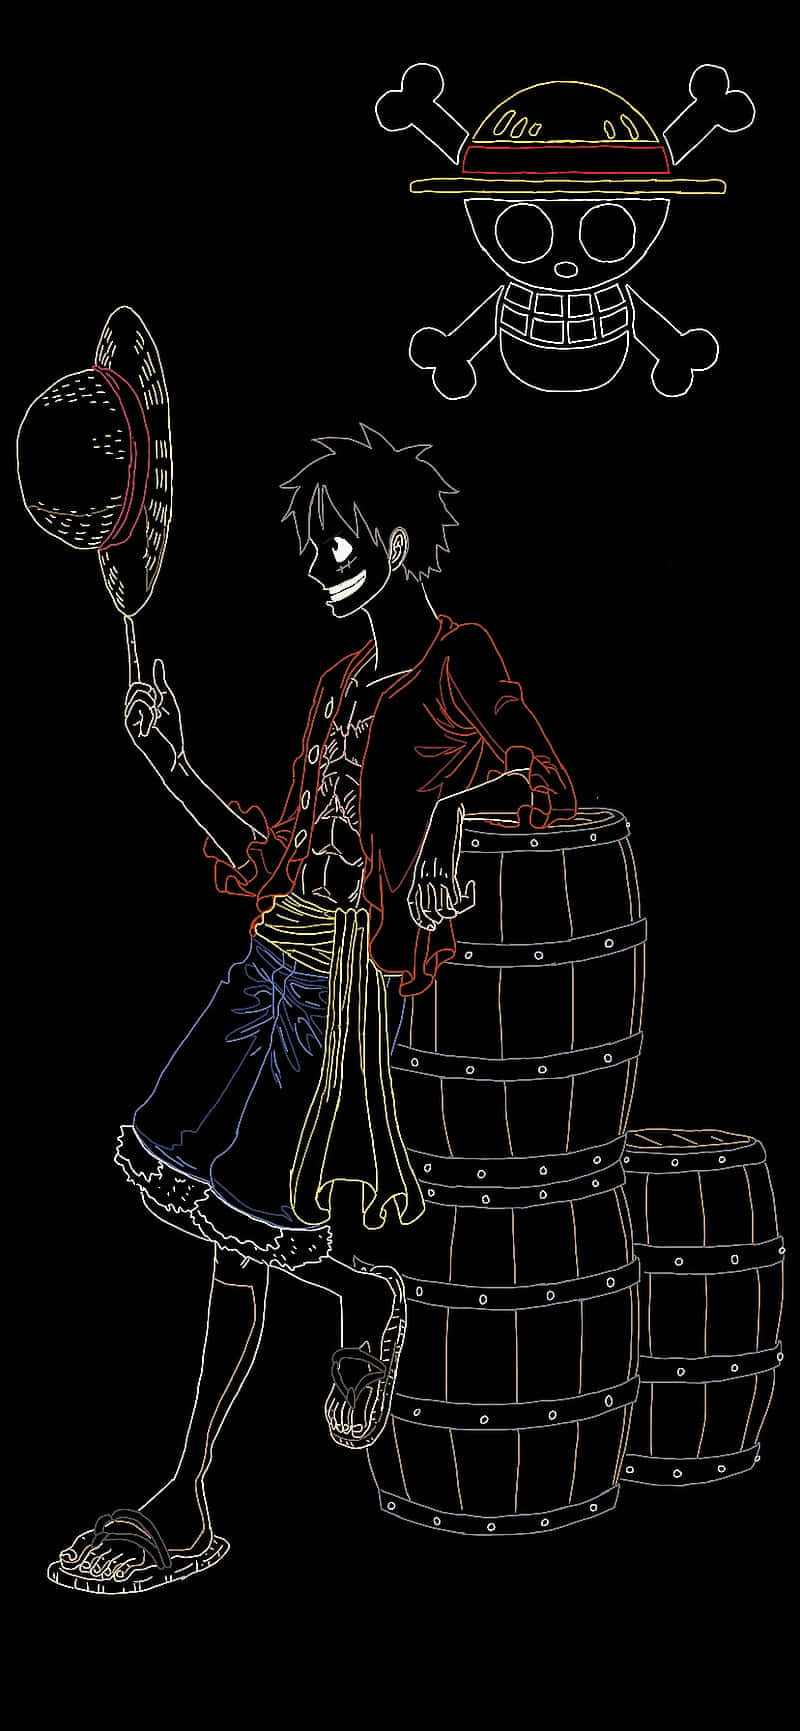 One Piece - A Pirate With A Hat And Barrels Wallpaper